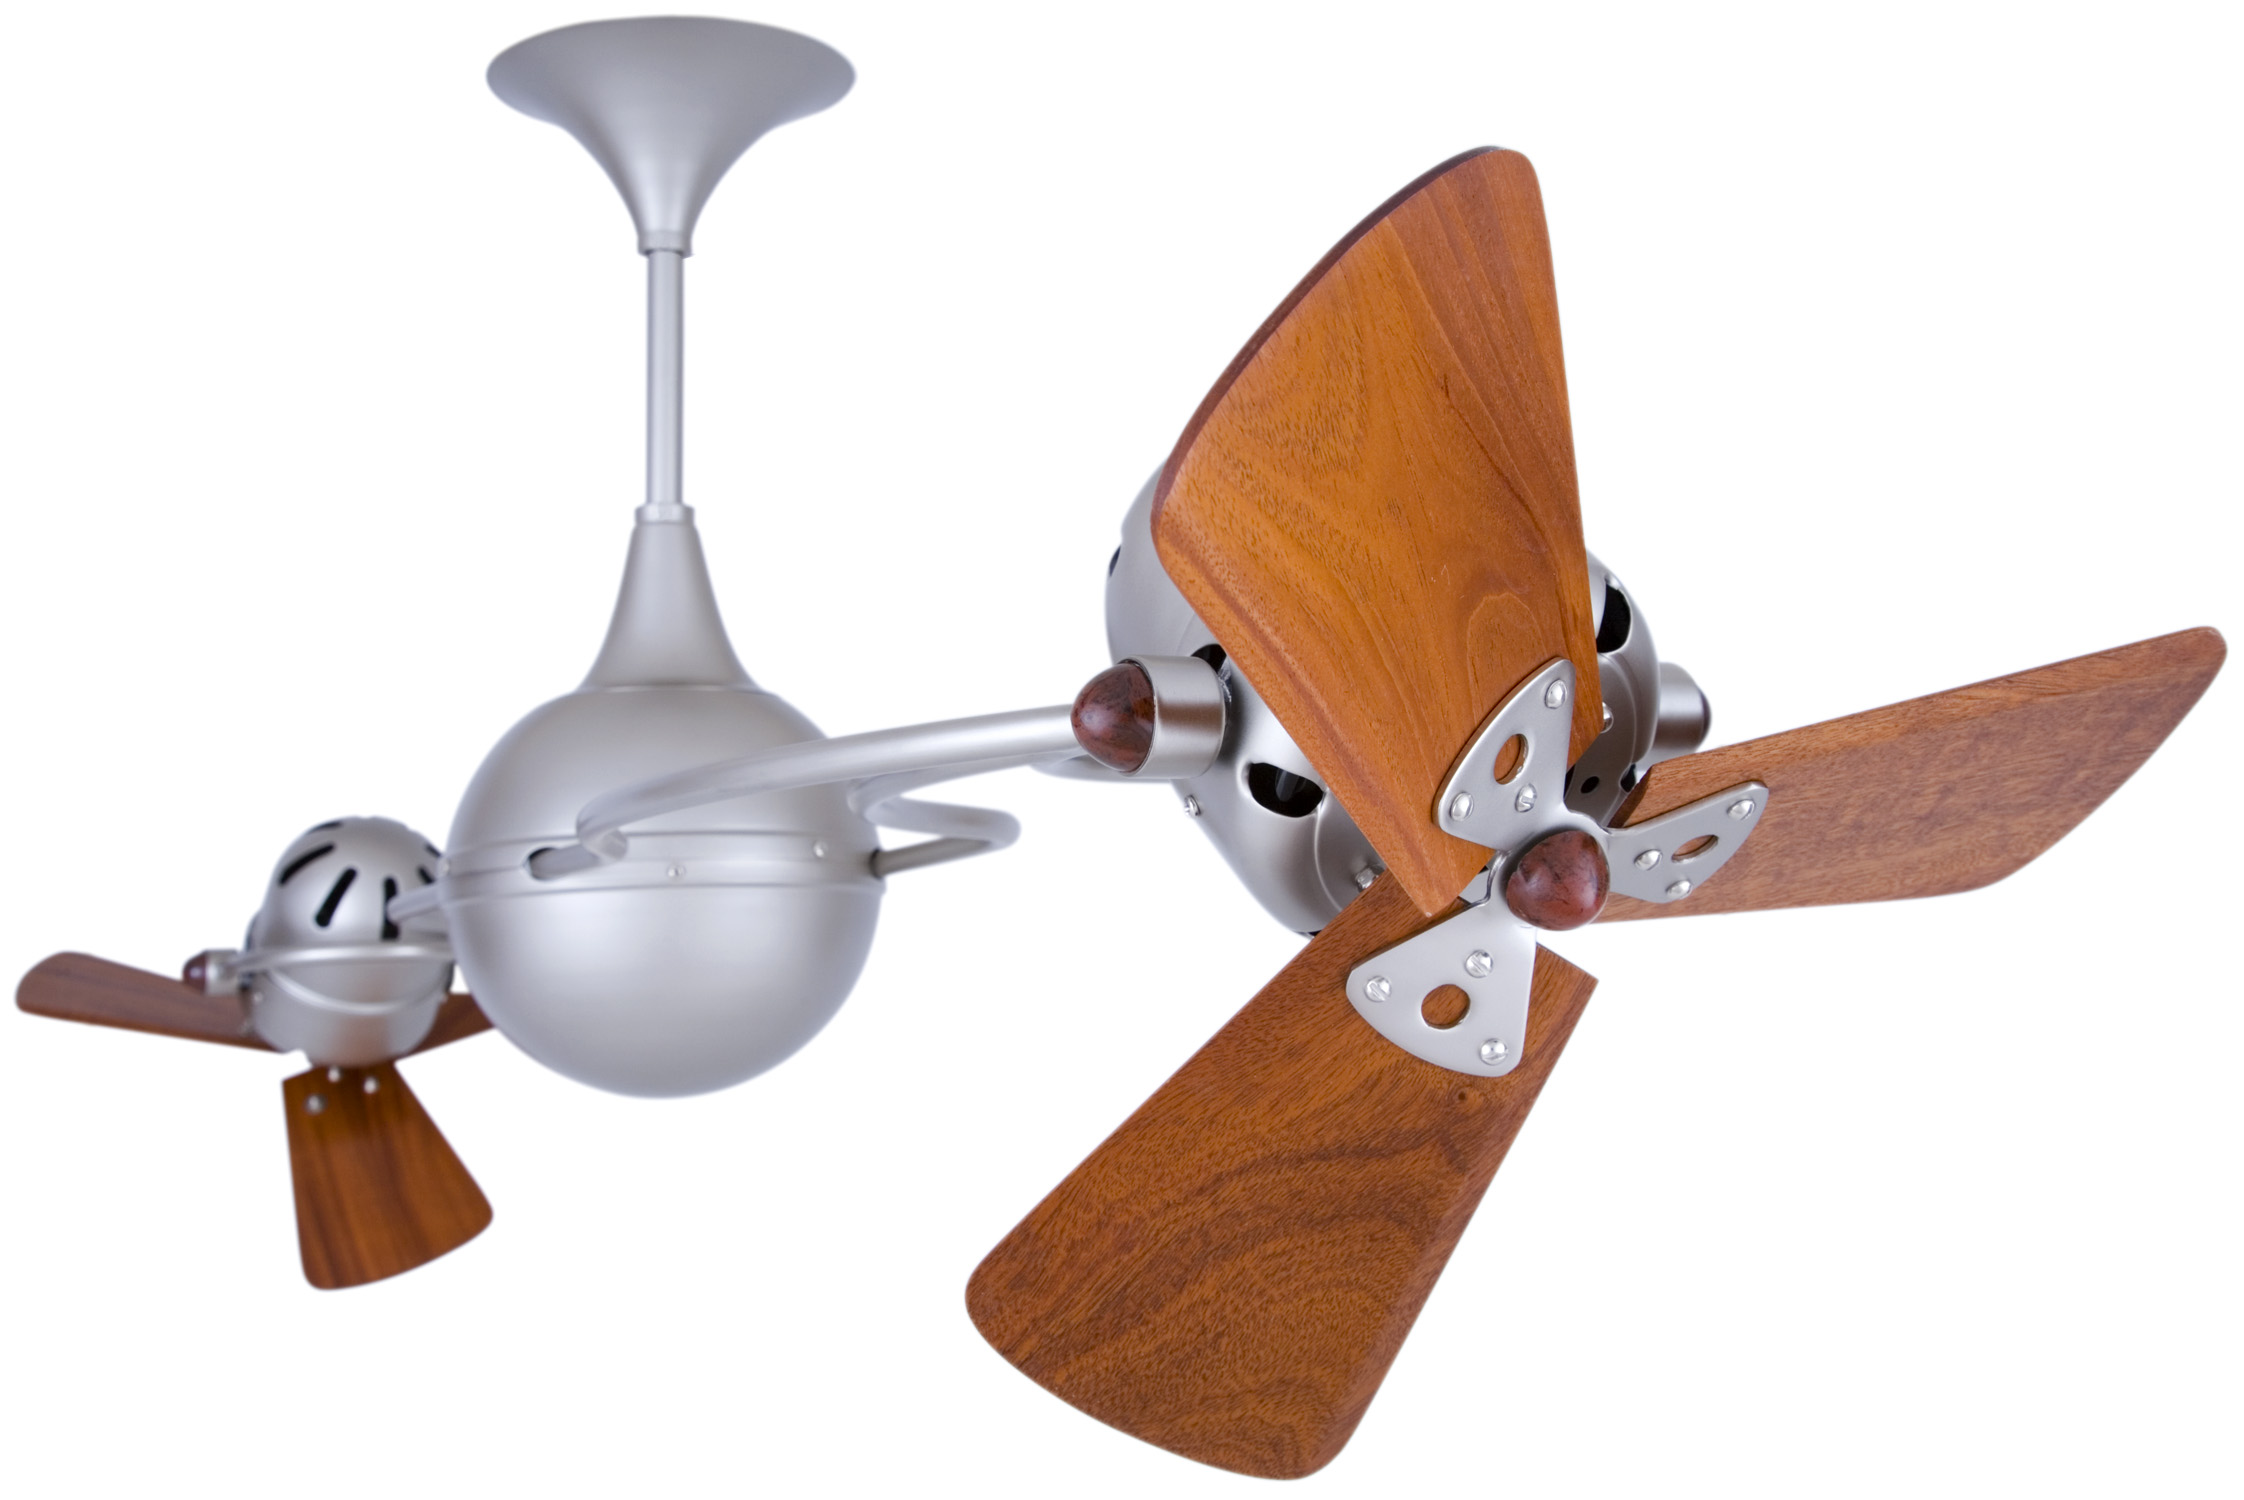 Italo Ventania Rotational Dual Head Ceiling Fan in Brushed Nickel Finish with Mahogany Wood Blades